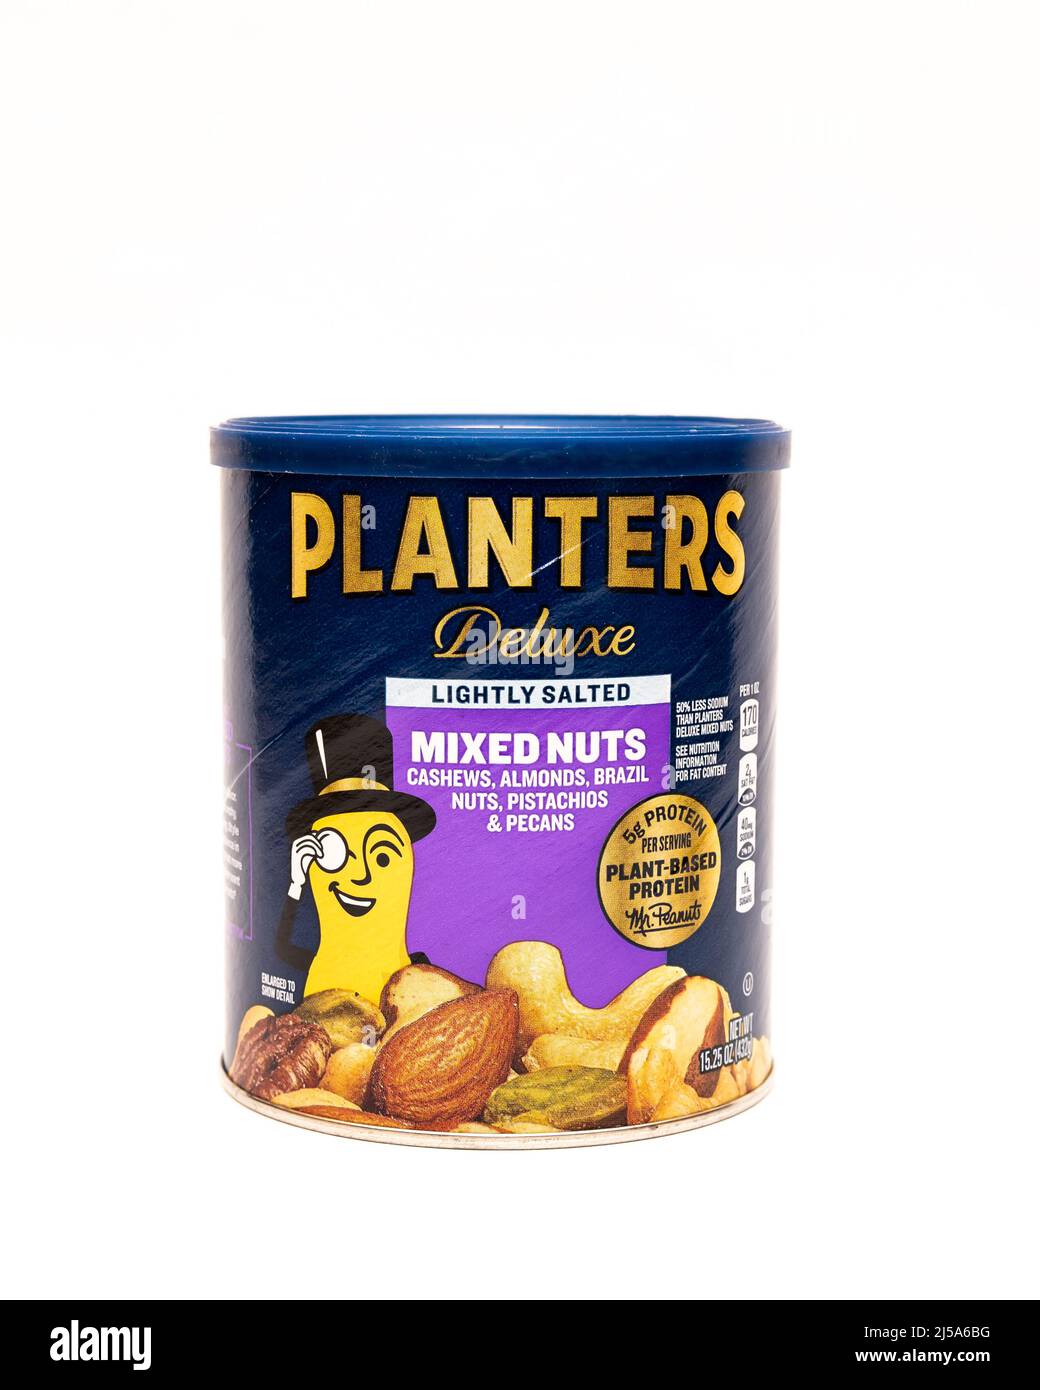 A cardboard container of Planters deluxe mixed nuts, including cashews, almonds, Brazil nuts, pecans and pistachios isolated on white Stock Photo